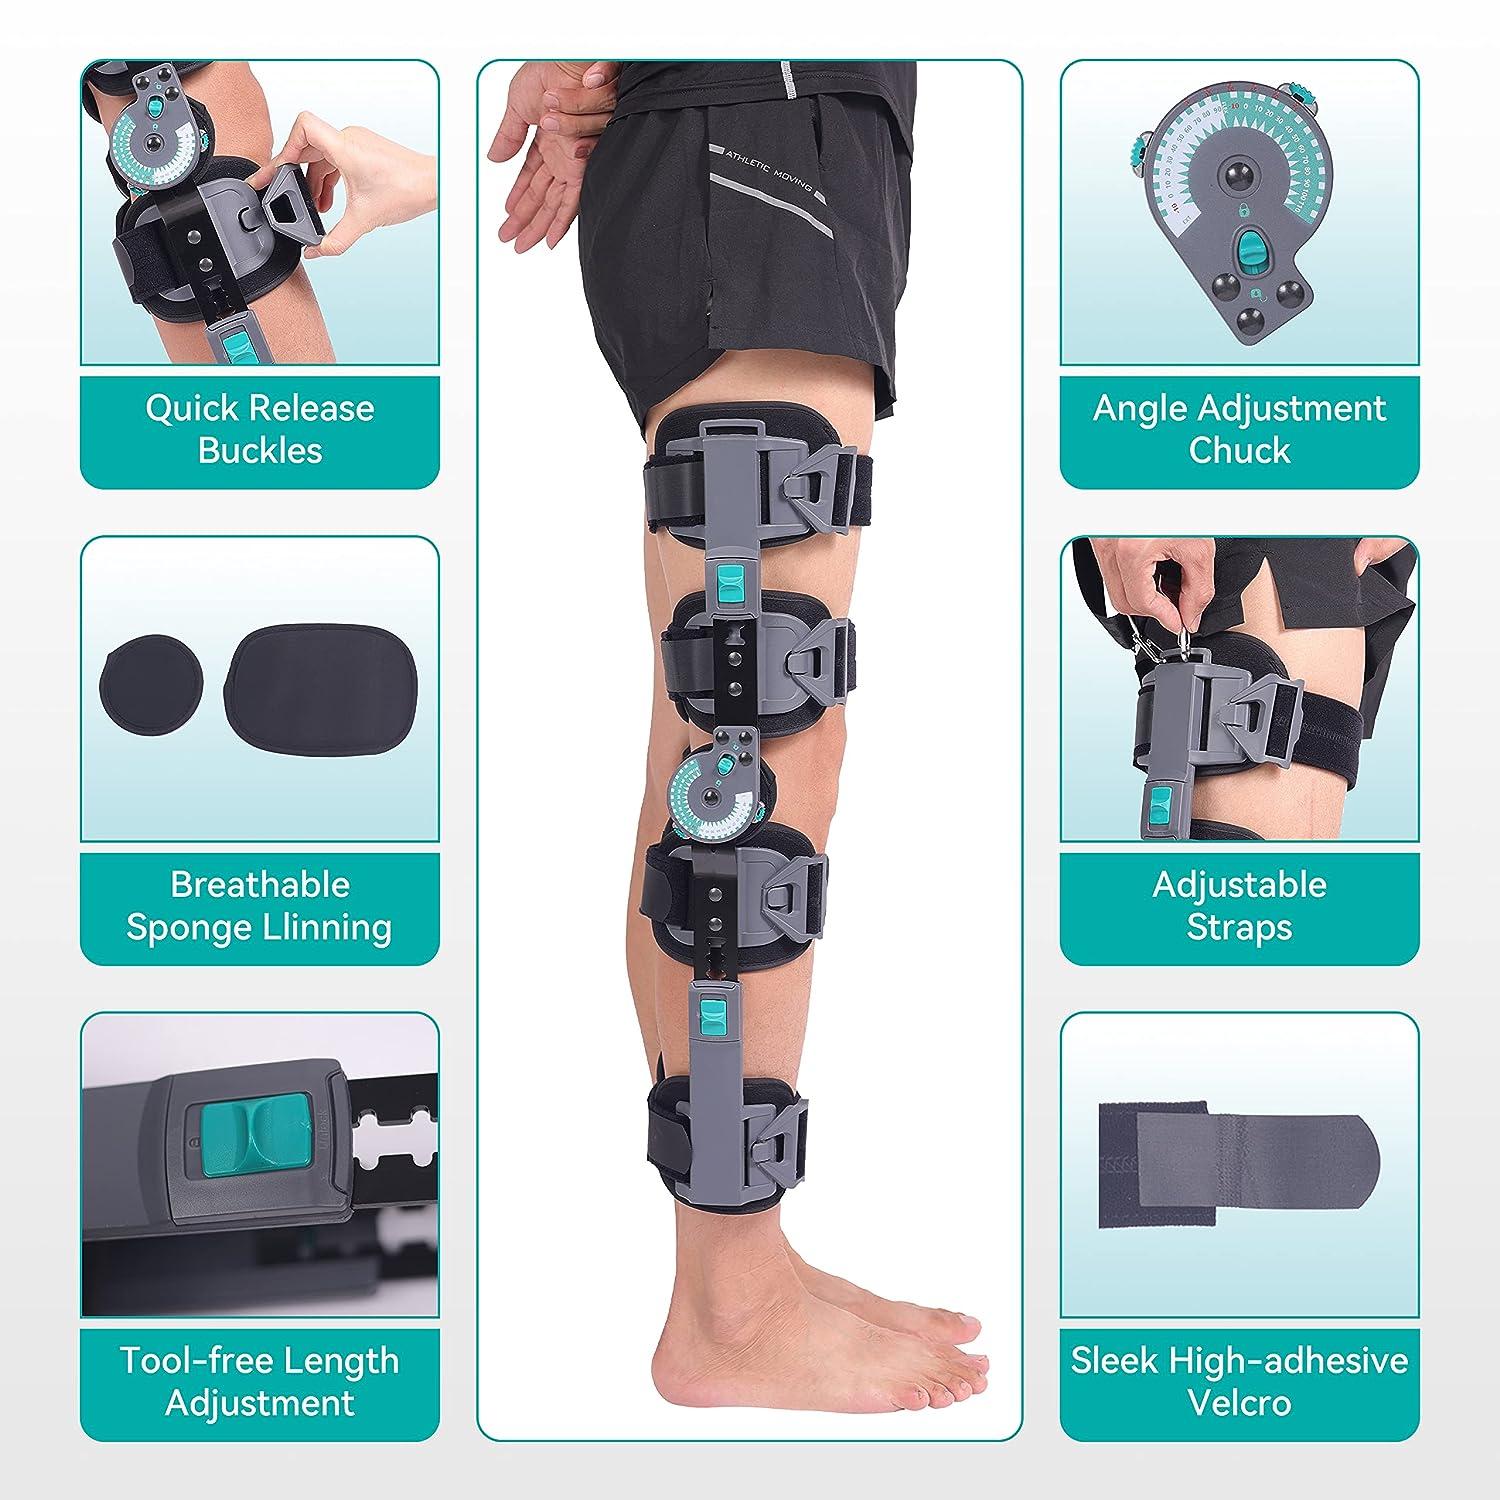 Hinged Knee Brace Rom Support for Torn Acl Meniscus Tear Pcl Surgery  Recovery